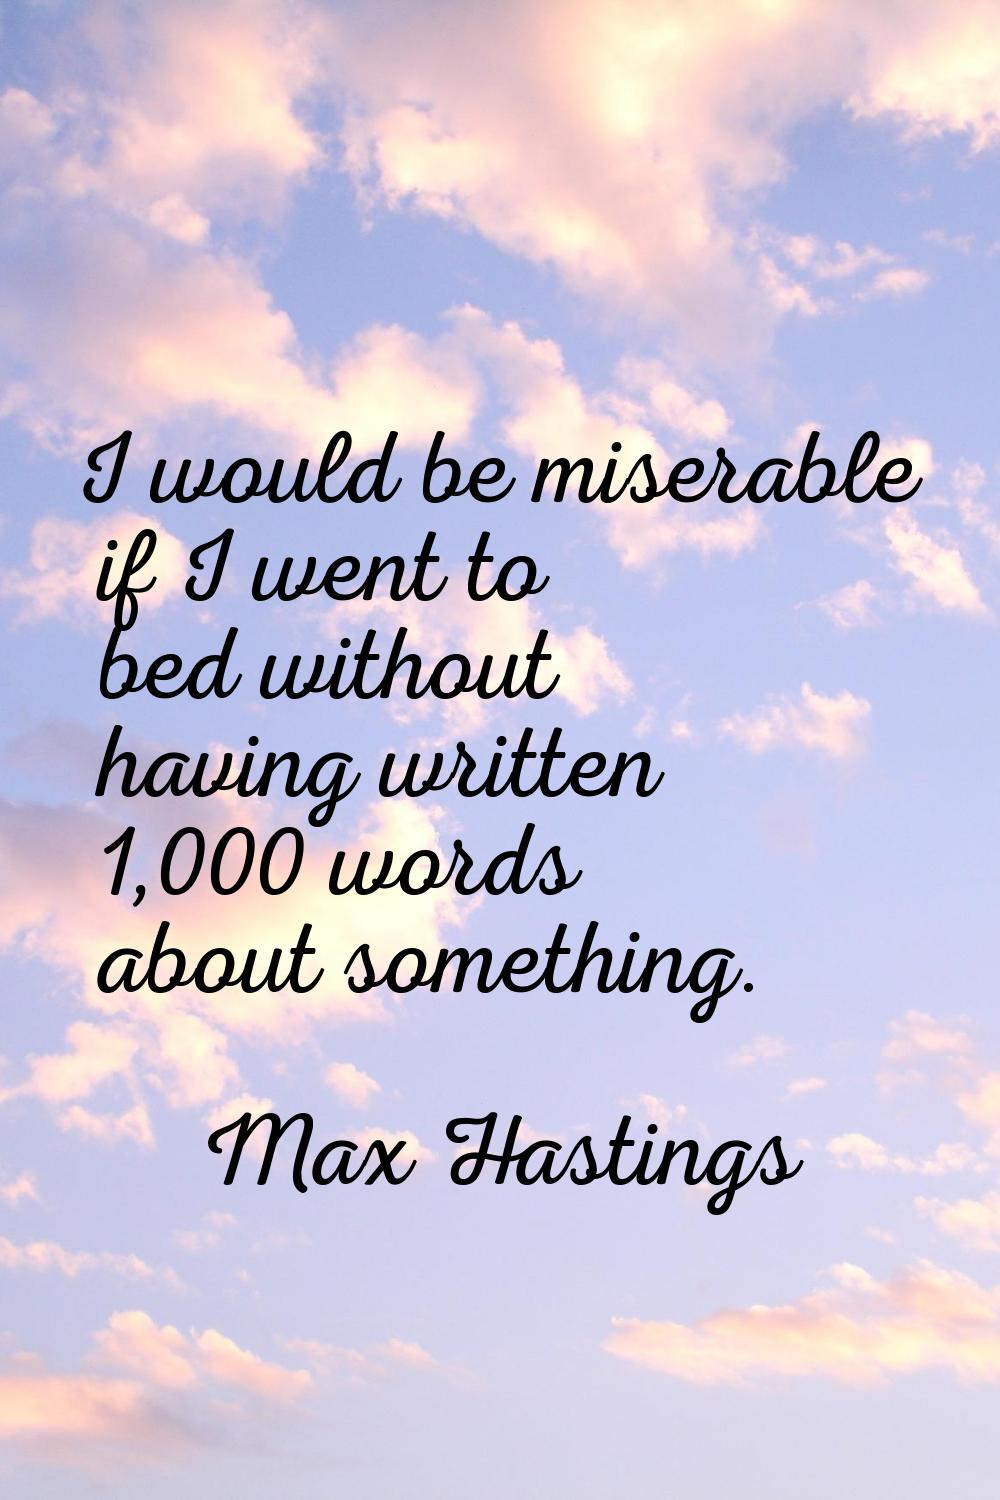 I would be miserable if I went to bed without having written 1,000 words about something.